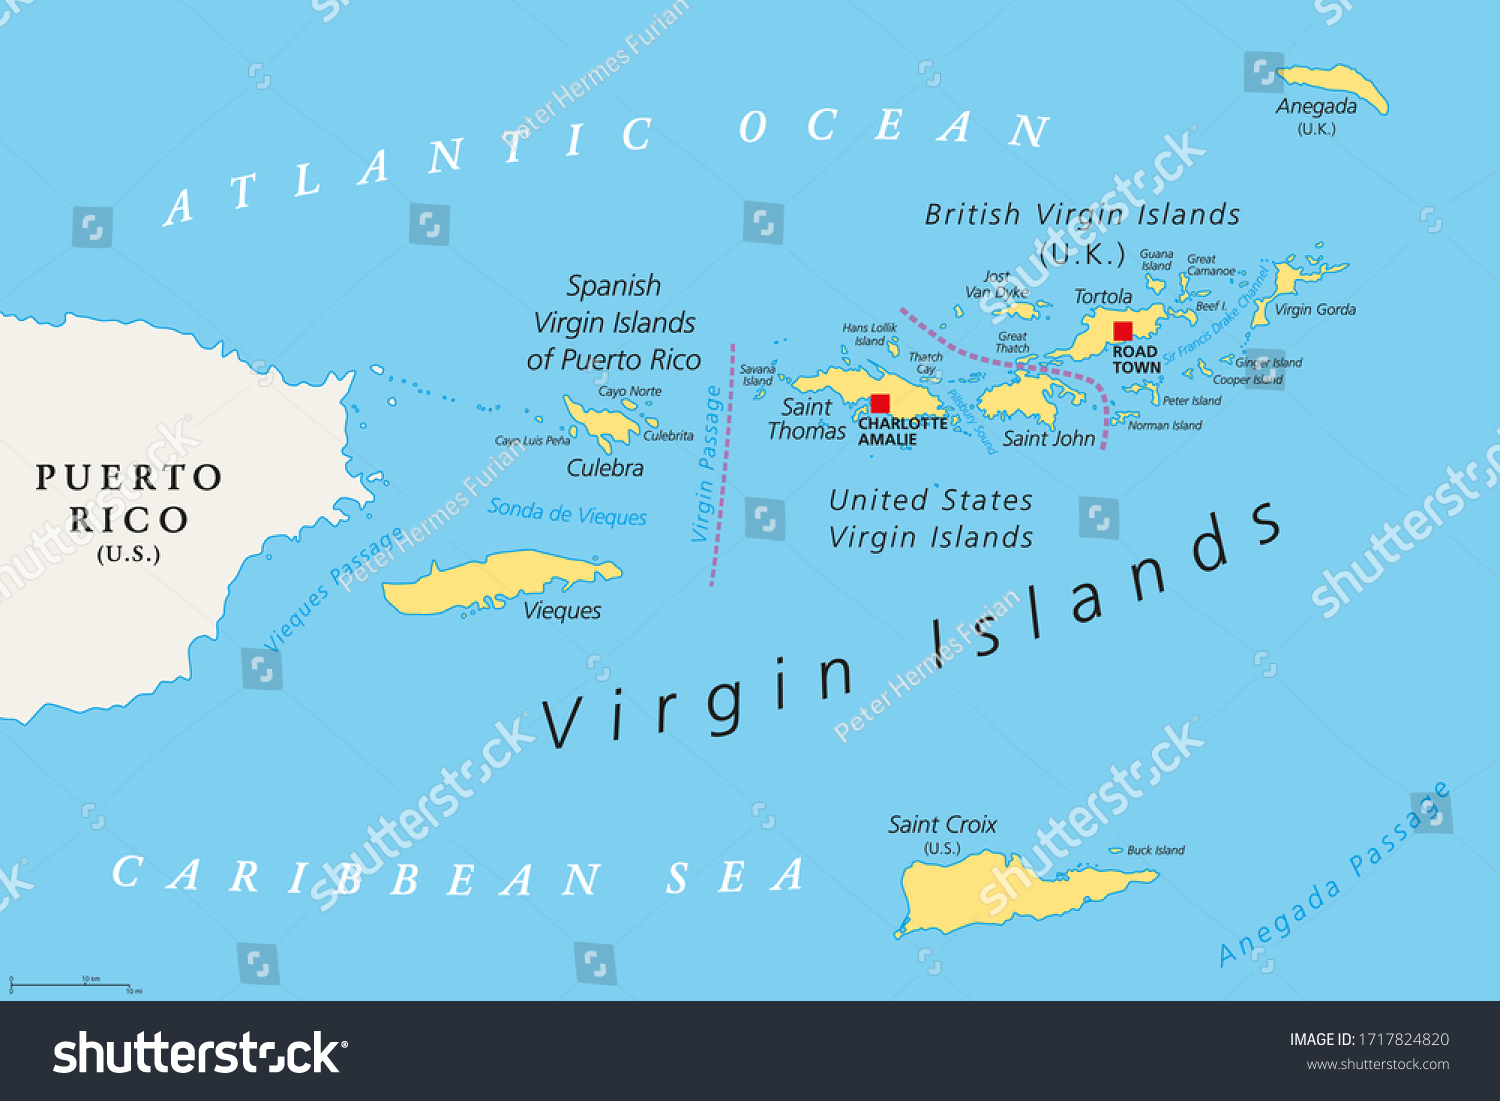 https://image.shutterstock.com/shutterstock/photos/1717824820/display_1500/stock-vector-british-spanish-and-united-states-virgin-islands-political-map-archipelago-in-the-caribbean-sea-1717824820.jpg